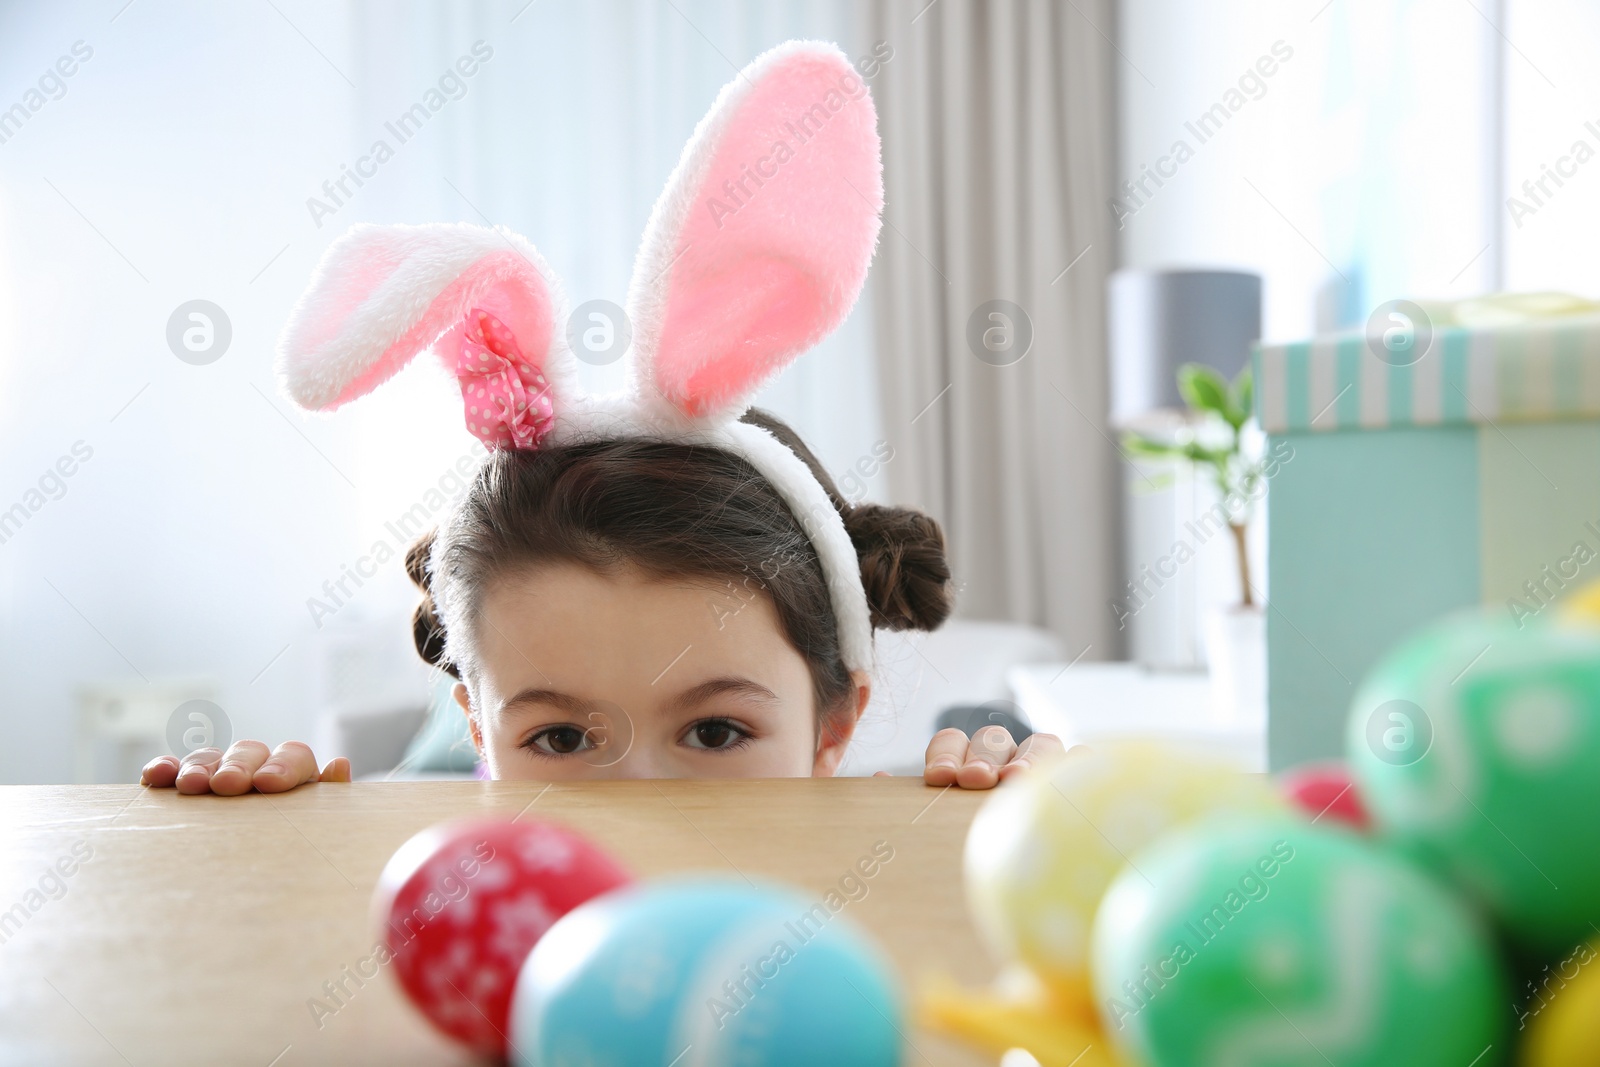 Photo of Cute little girl wearing bunny ears headband hiding behind table with painted Easter eggs in room